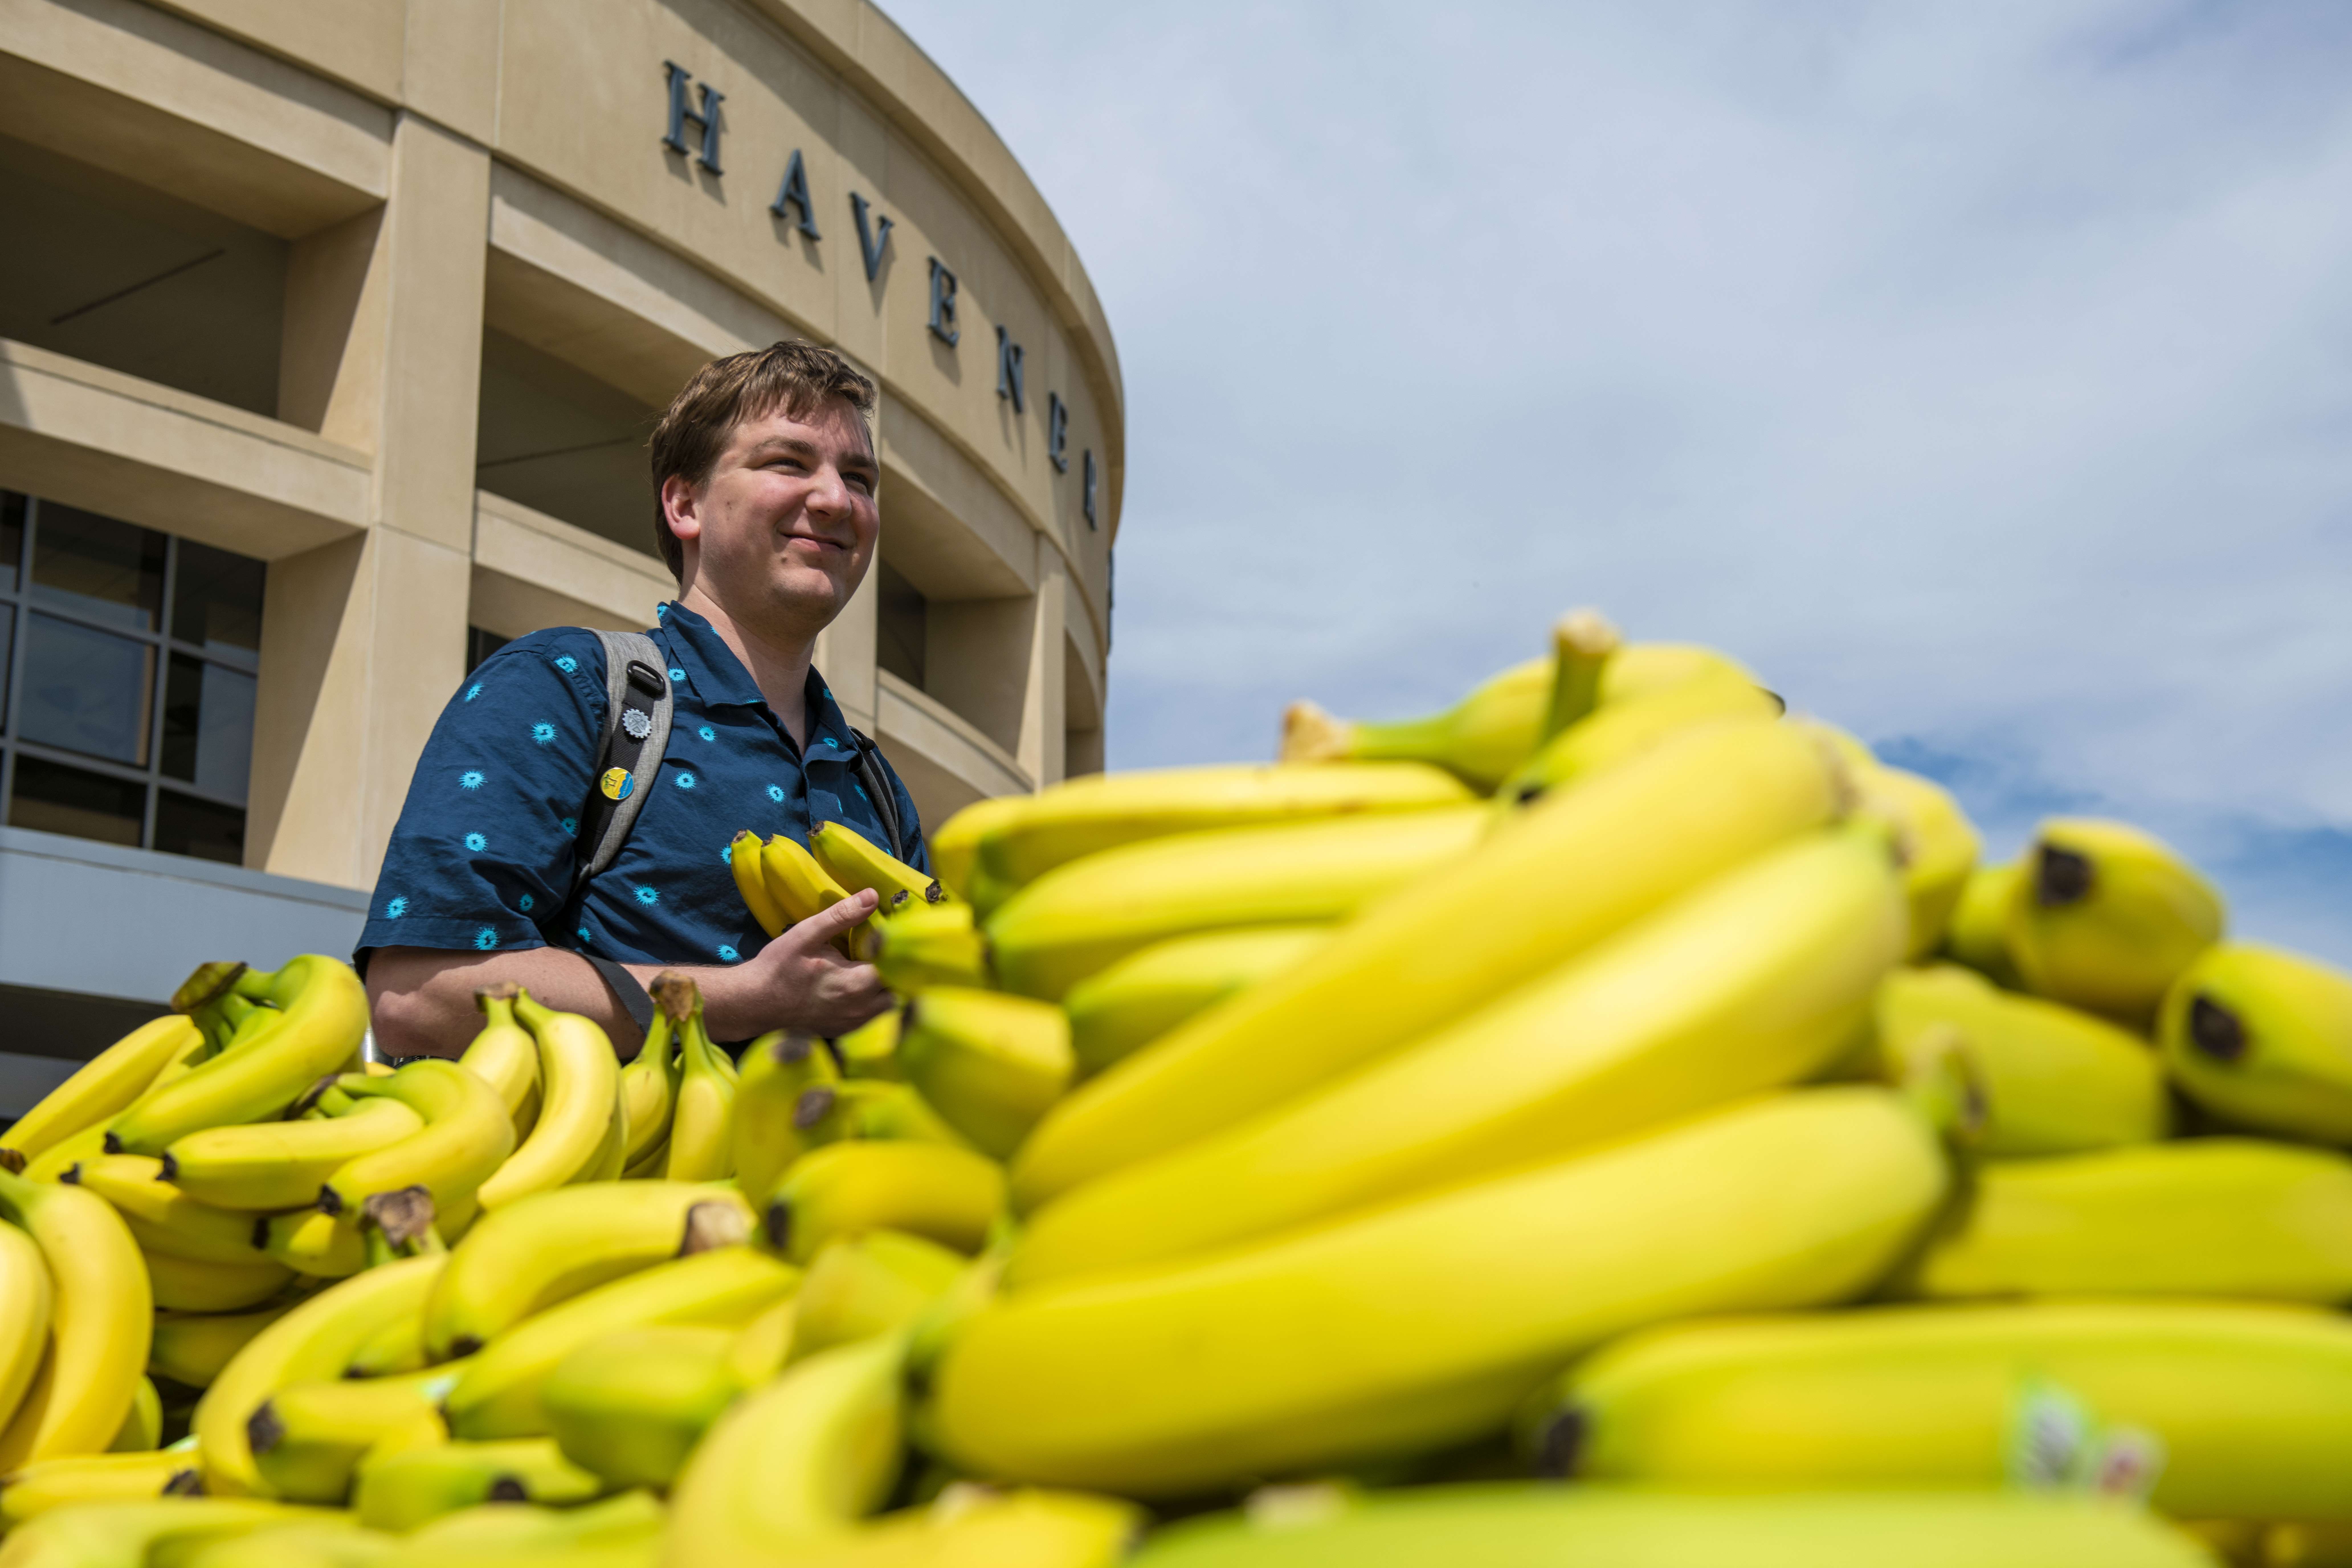 Logan Dietz with a pile of bananas?